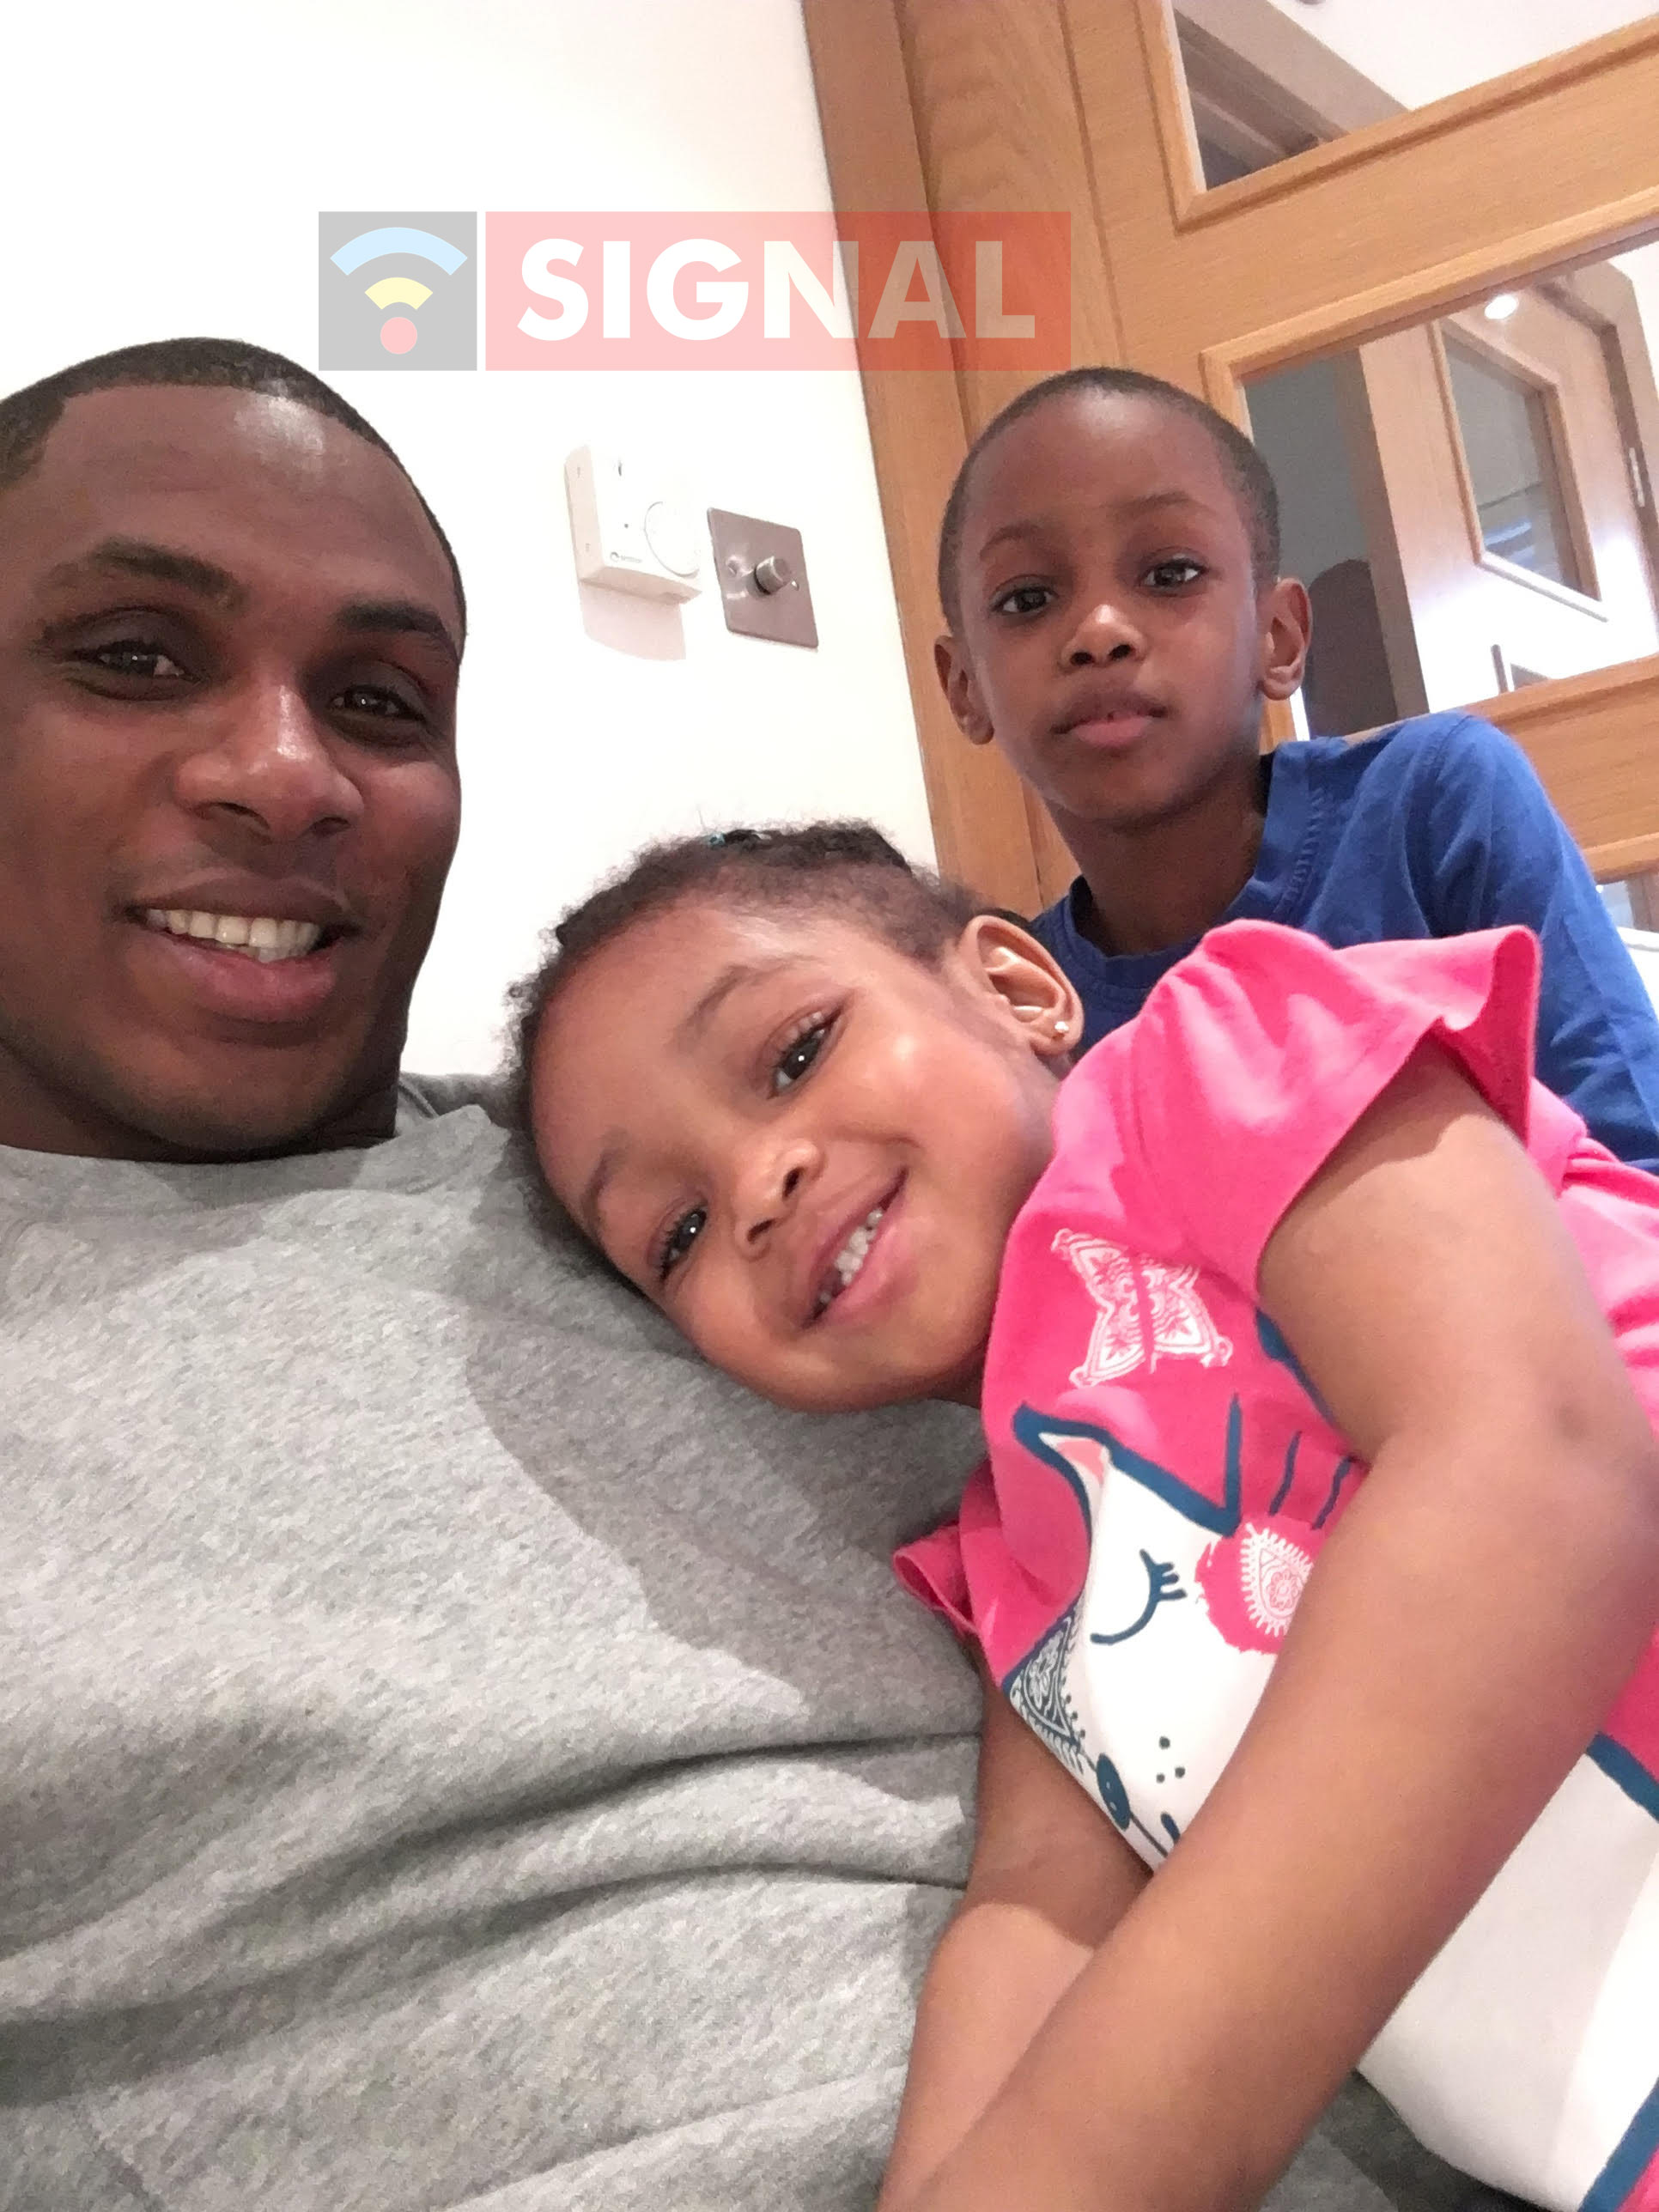 Odion Ighalo relaxes at home with his kids | Photo: SIGNAL 